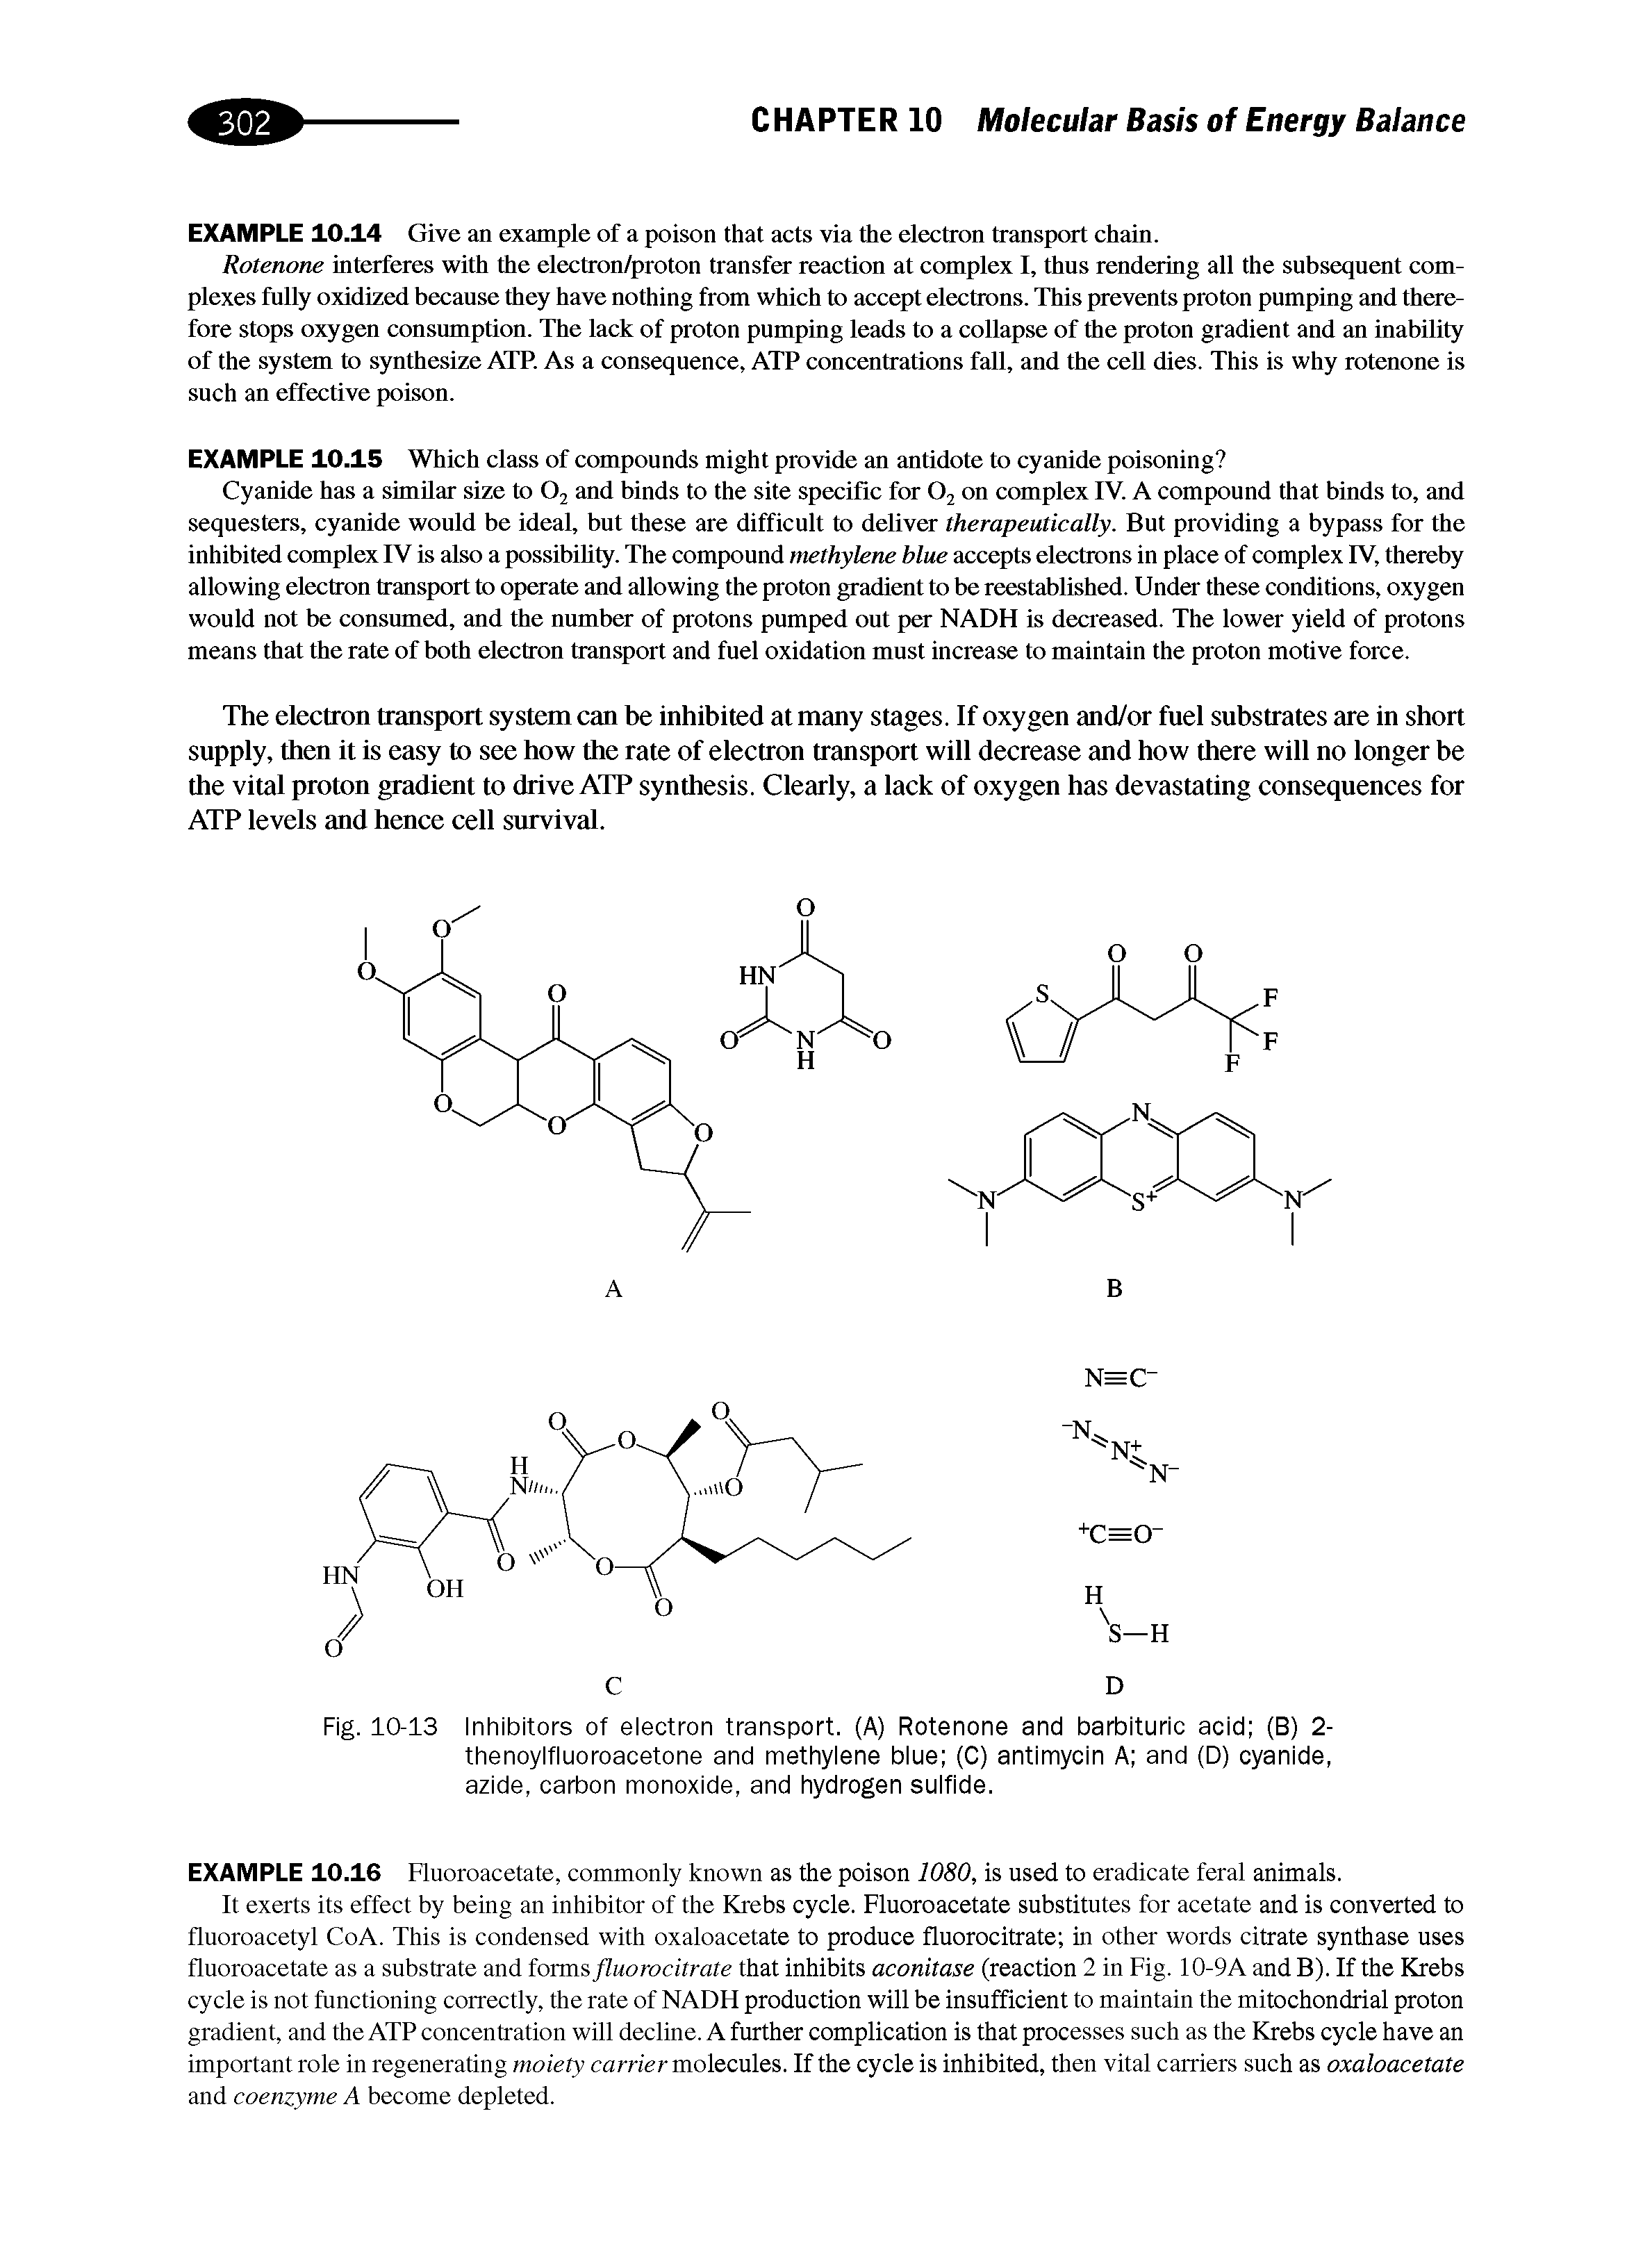 Fig. 10-13 Inhibitors of electron transport. (A) Rotenone and barbituric acid (B) 2-thenoylfluoroacetone and methylene blue (C) antimycin A and (D) cyanide, azide, carbon monoxide, and hydrogen sulfide.